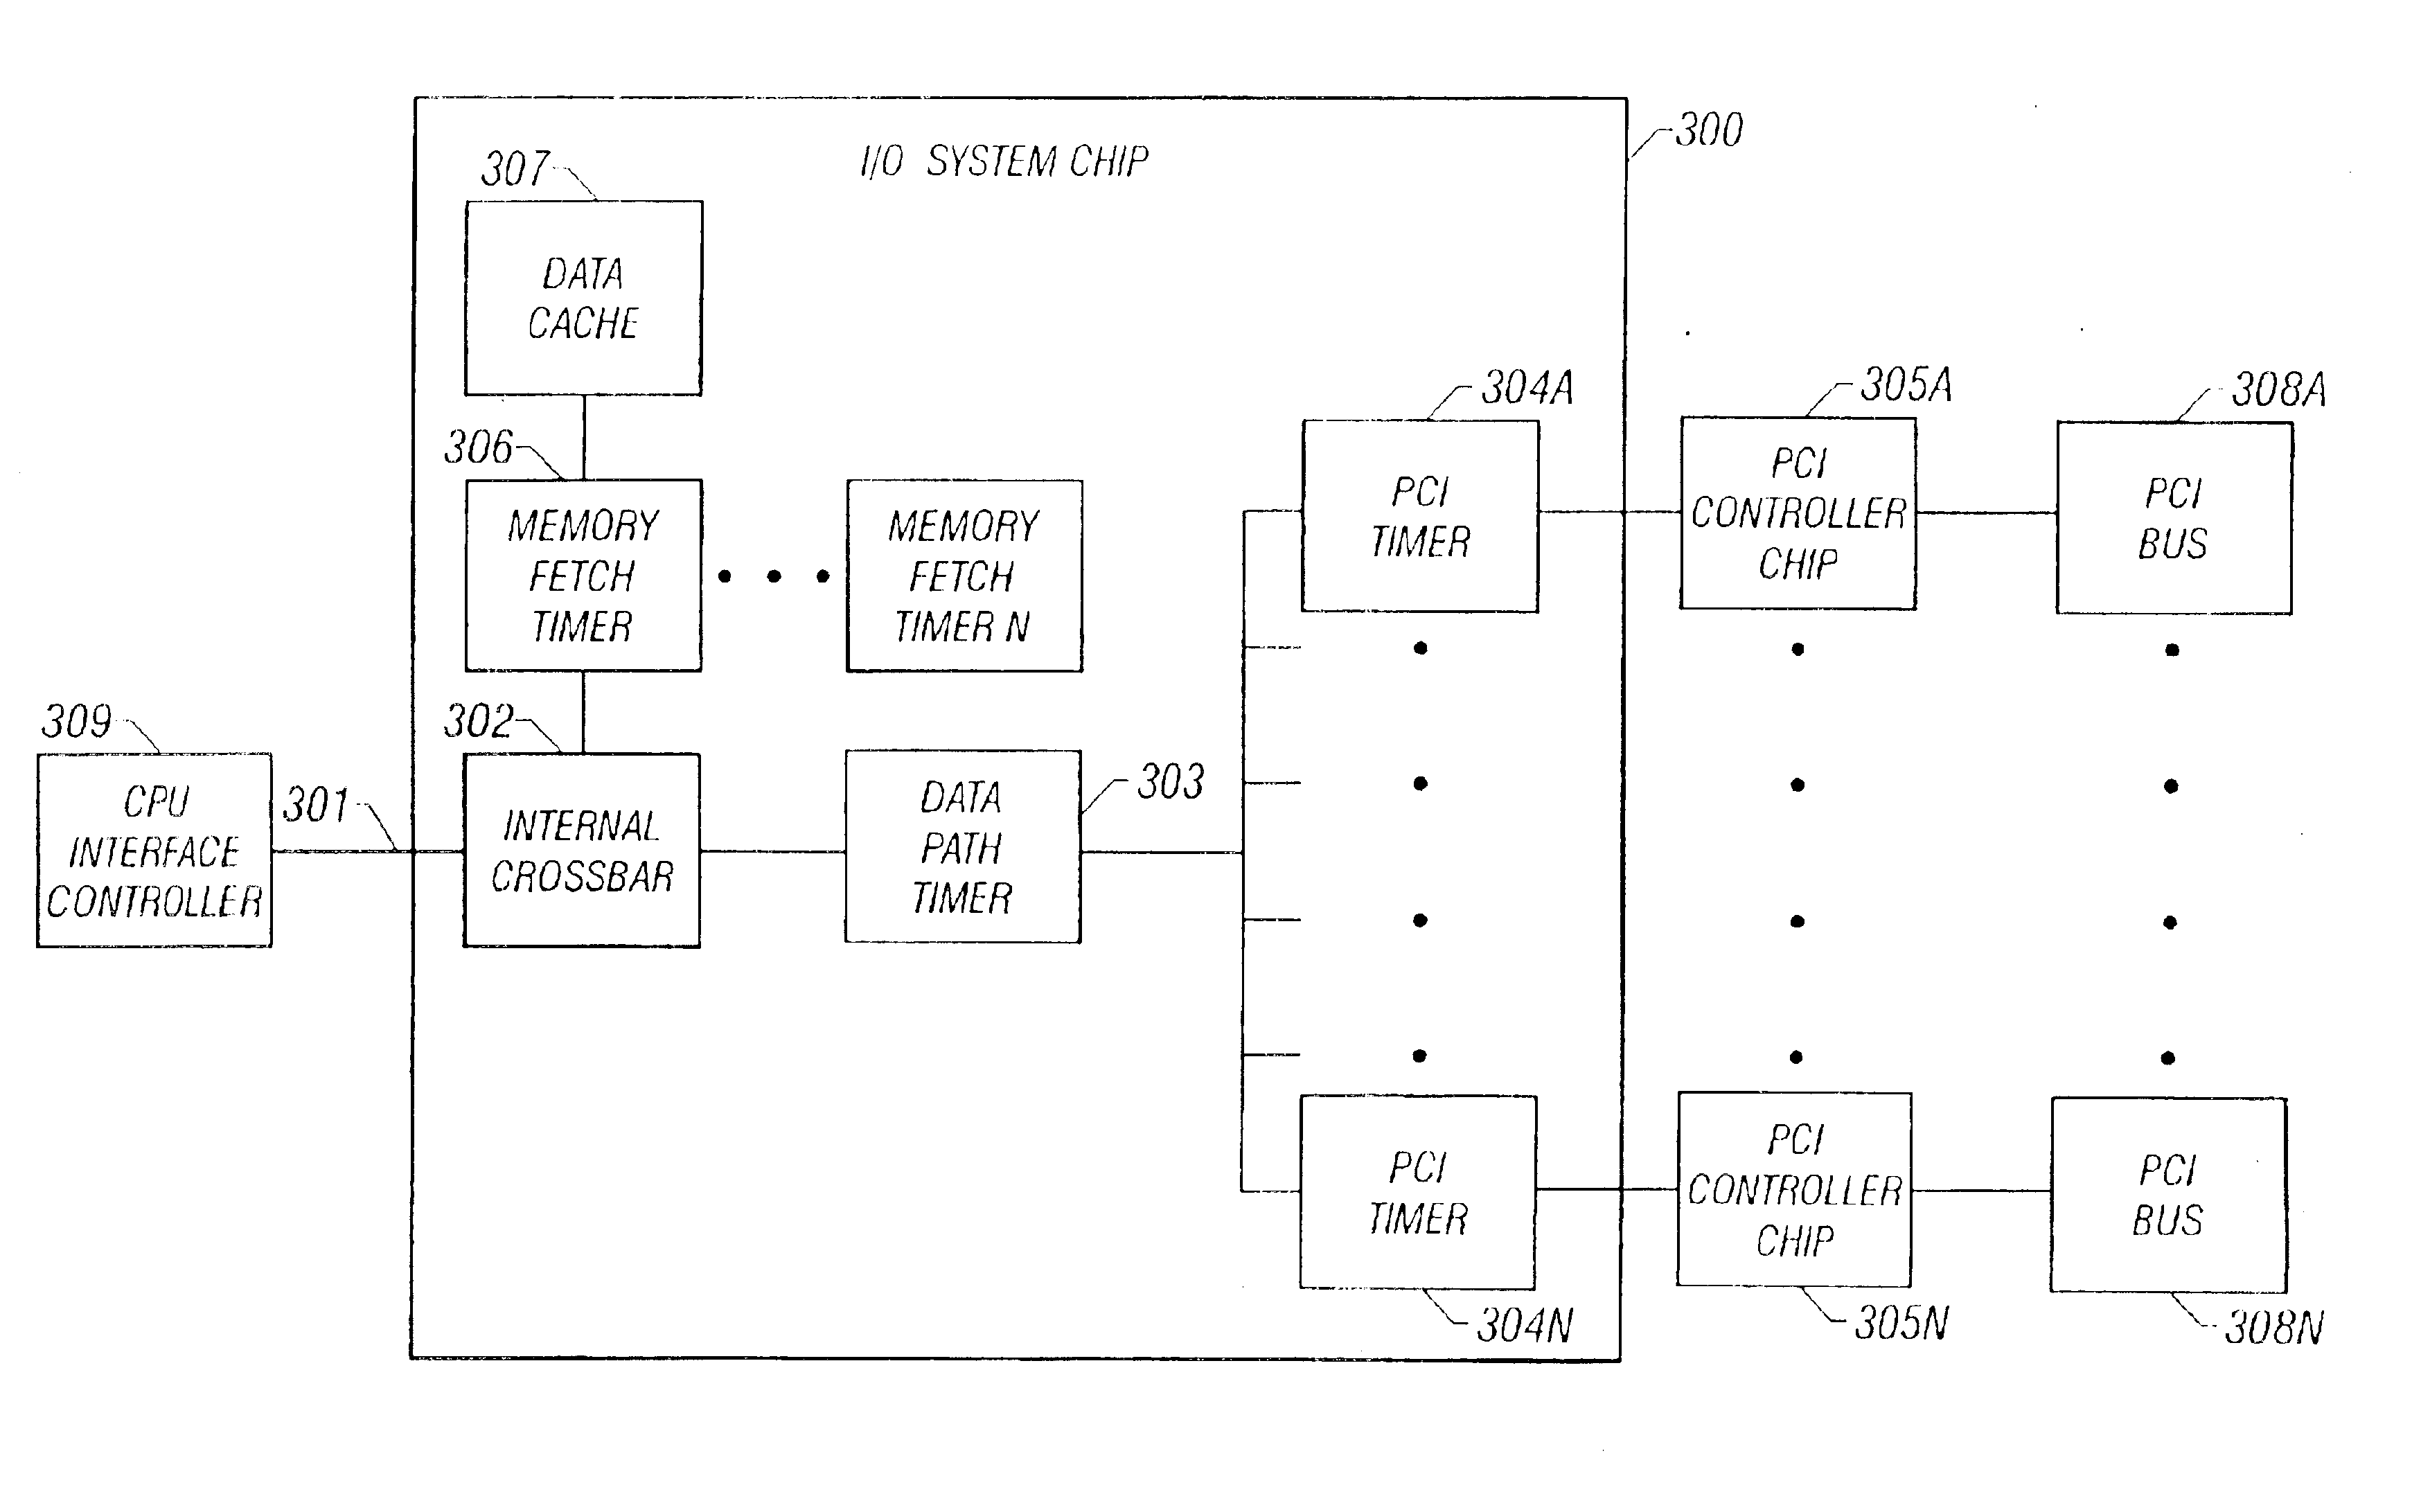 Hierarchy of fault isolation timers